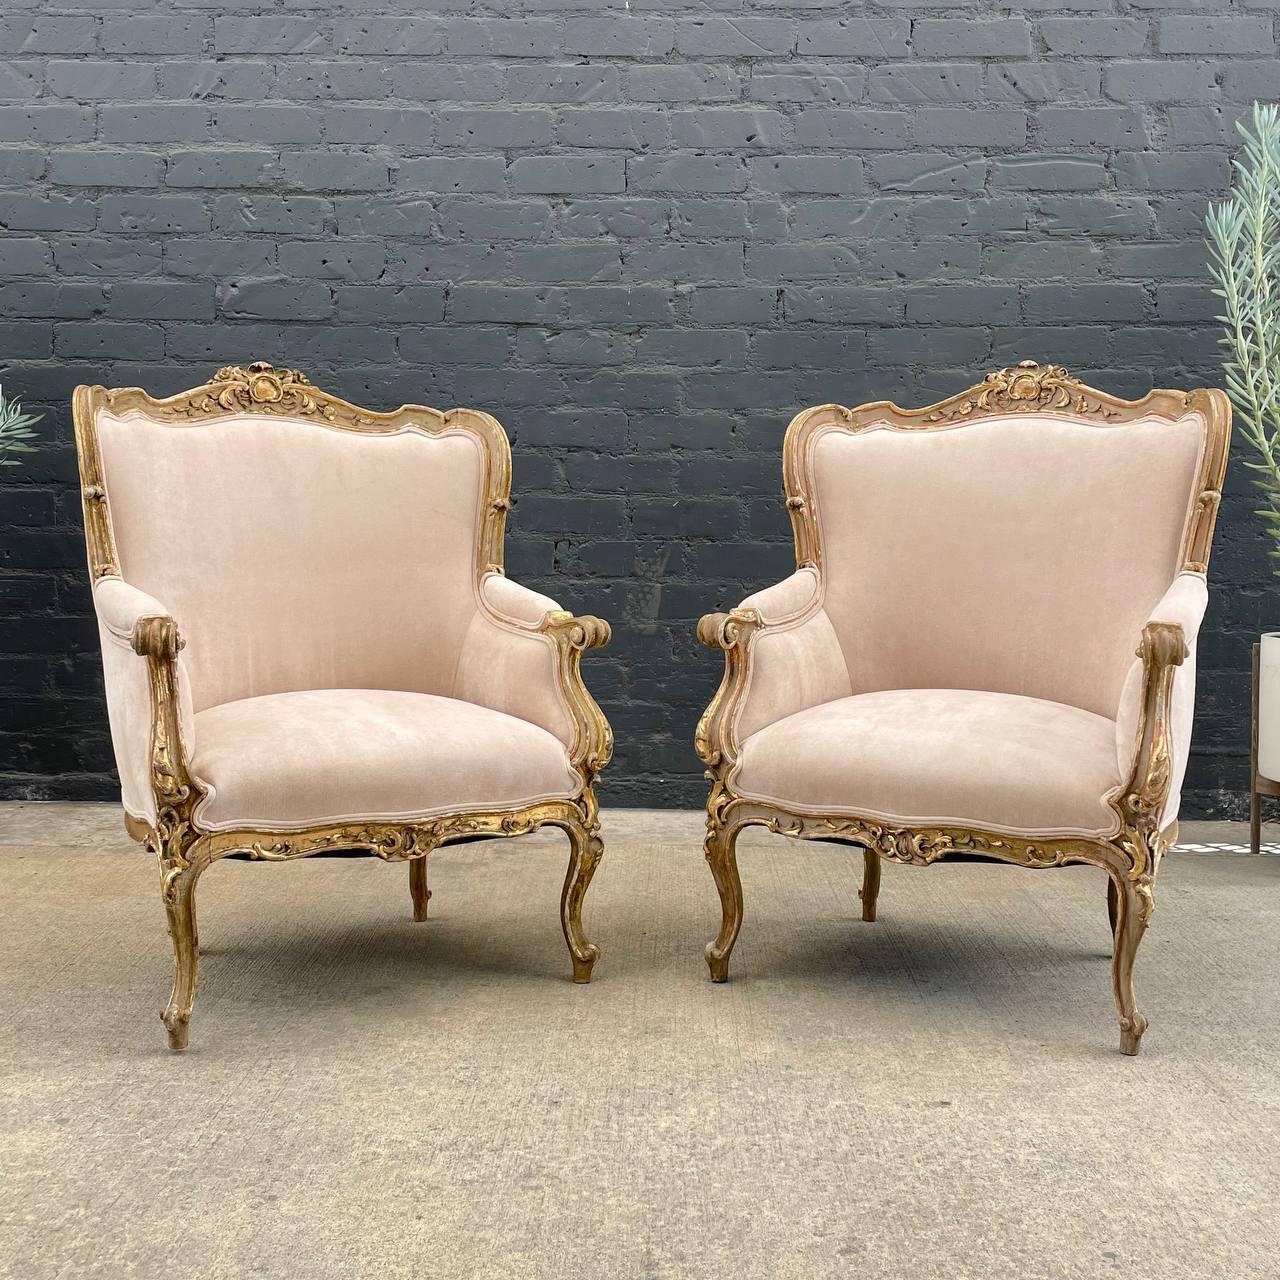 Pair of French Louis XV Style Painted & Parcel-Gilt Armchairs 

Country: France 
Materials: Gilt-wood, Velvet
Condition: Newly Reupholstered 
Style: French Louis XV
Year: 1920’s

$7,500 pair 

Dimensions:
39”H x 28”W x 28”D
Seat Height 17”